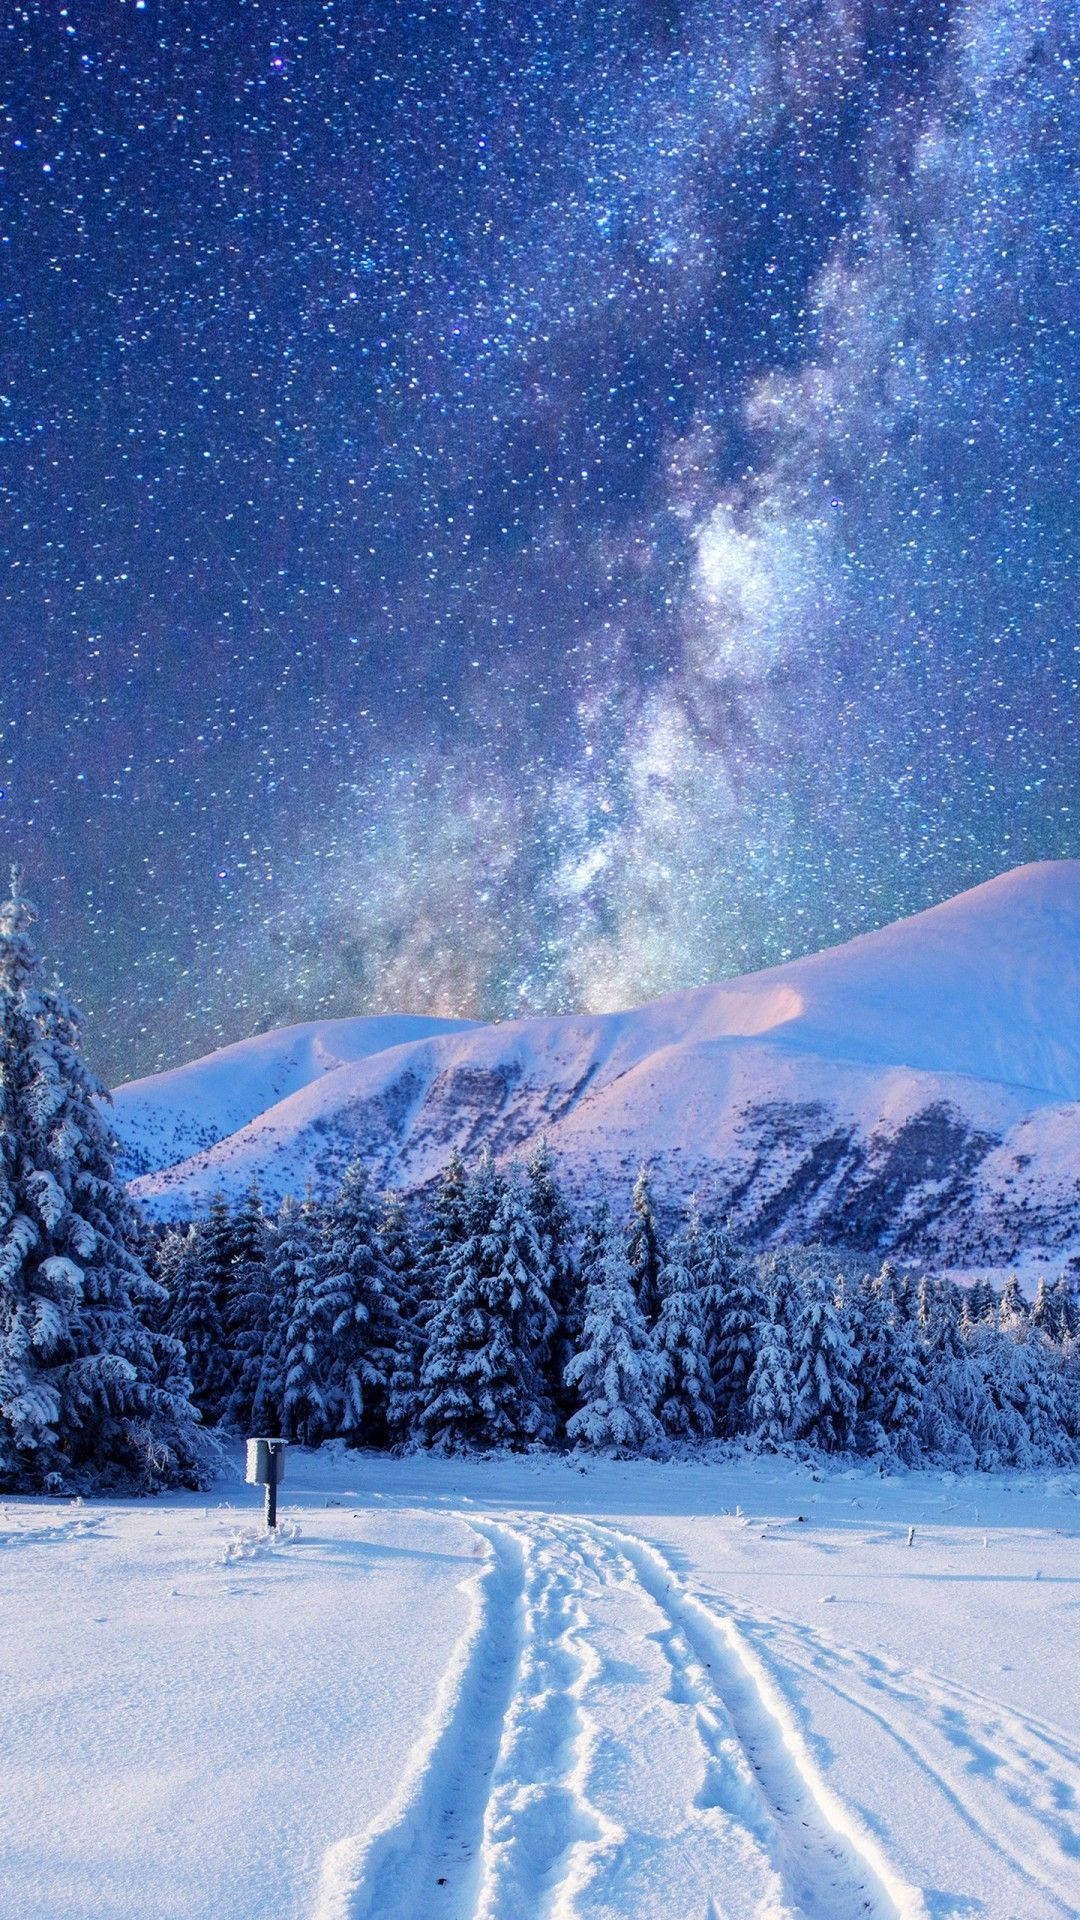 Sky And Winter Mountains Wallpaper